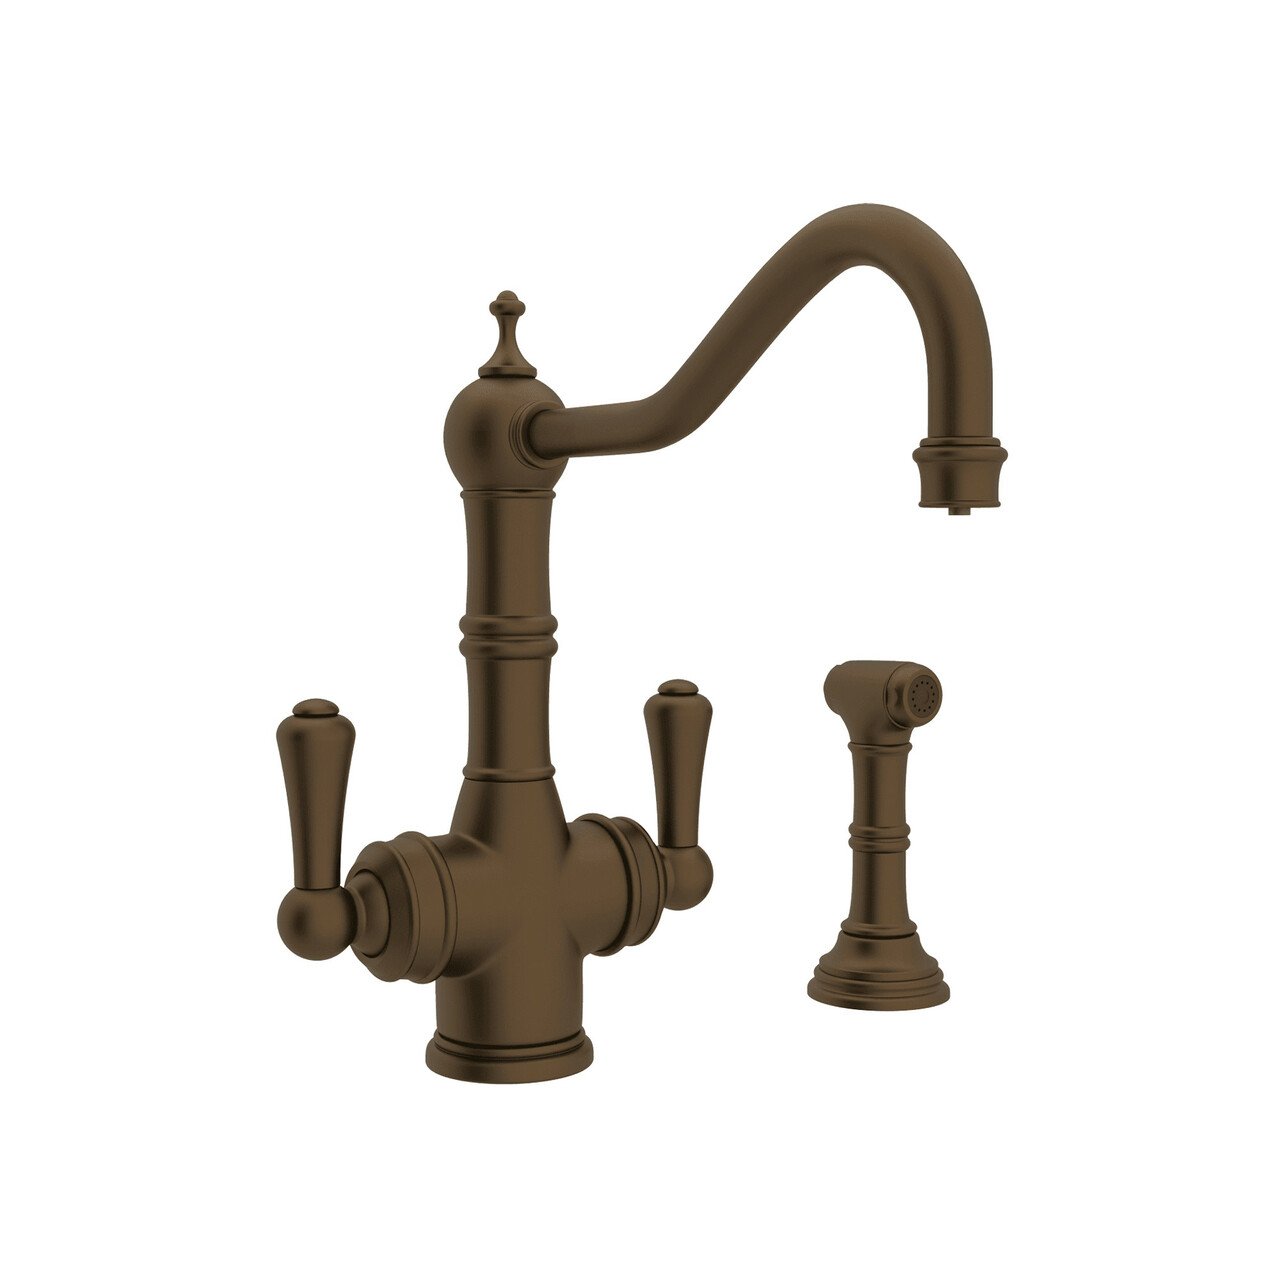 Perrin & Rowe Edwardian Filtration 2-Lever Kitchen Faucet with Sidespray - BNGBath